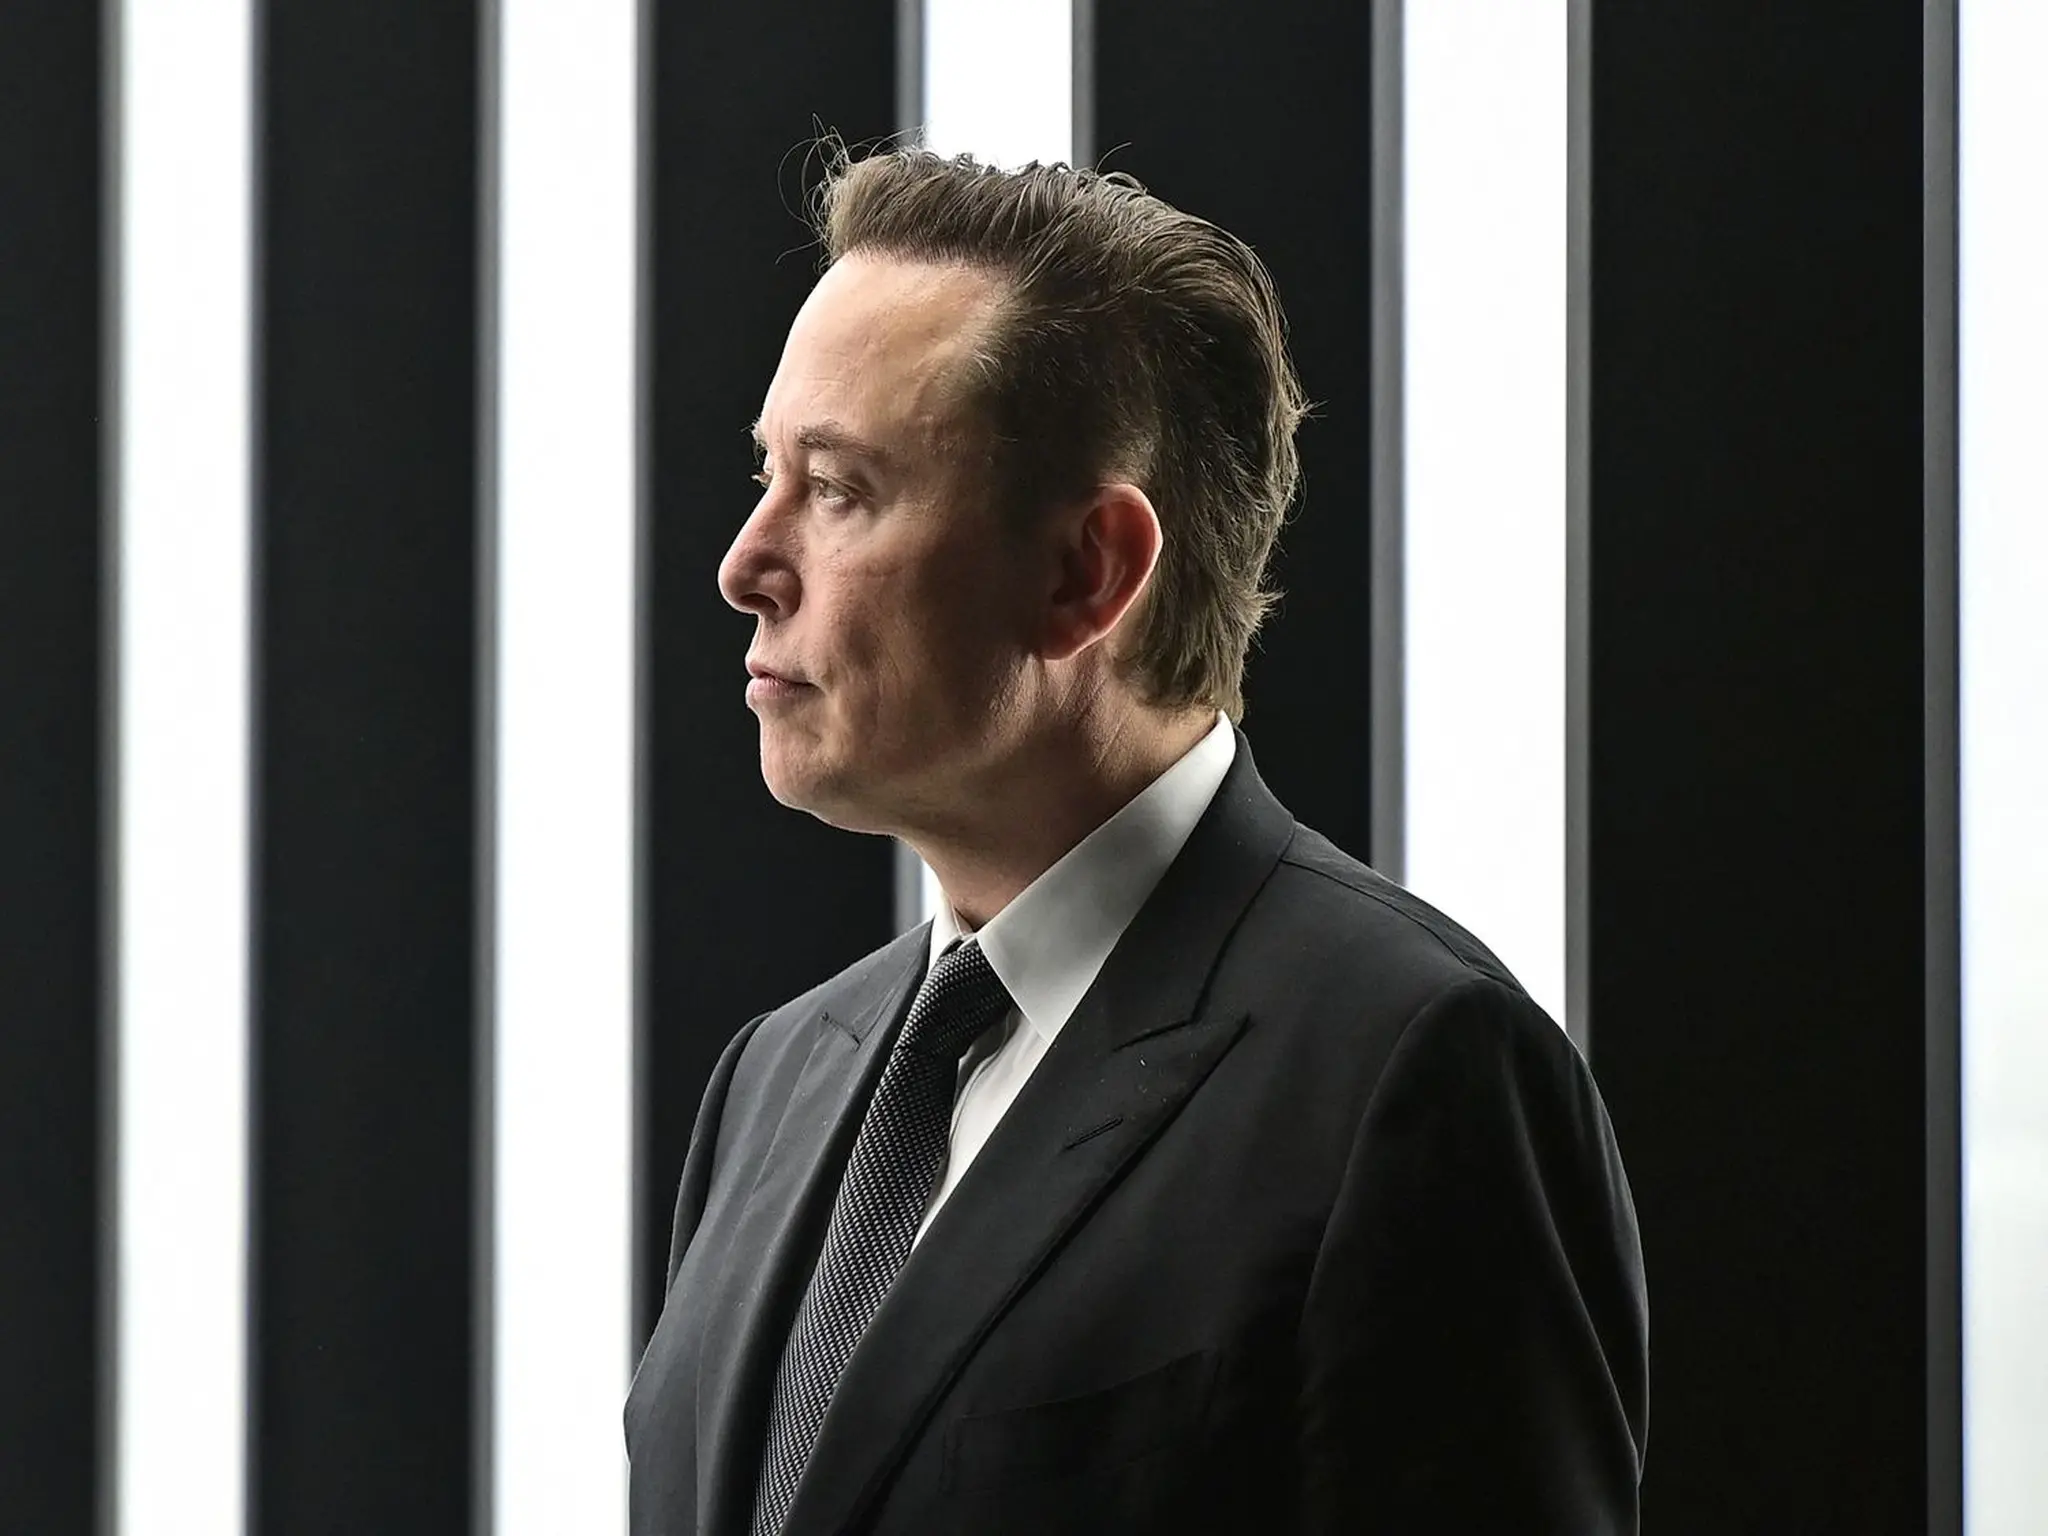 "Musk" congratulates the UAE on Hope probe's stunning observations